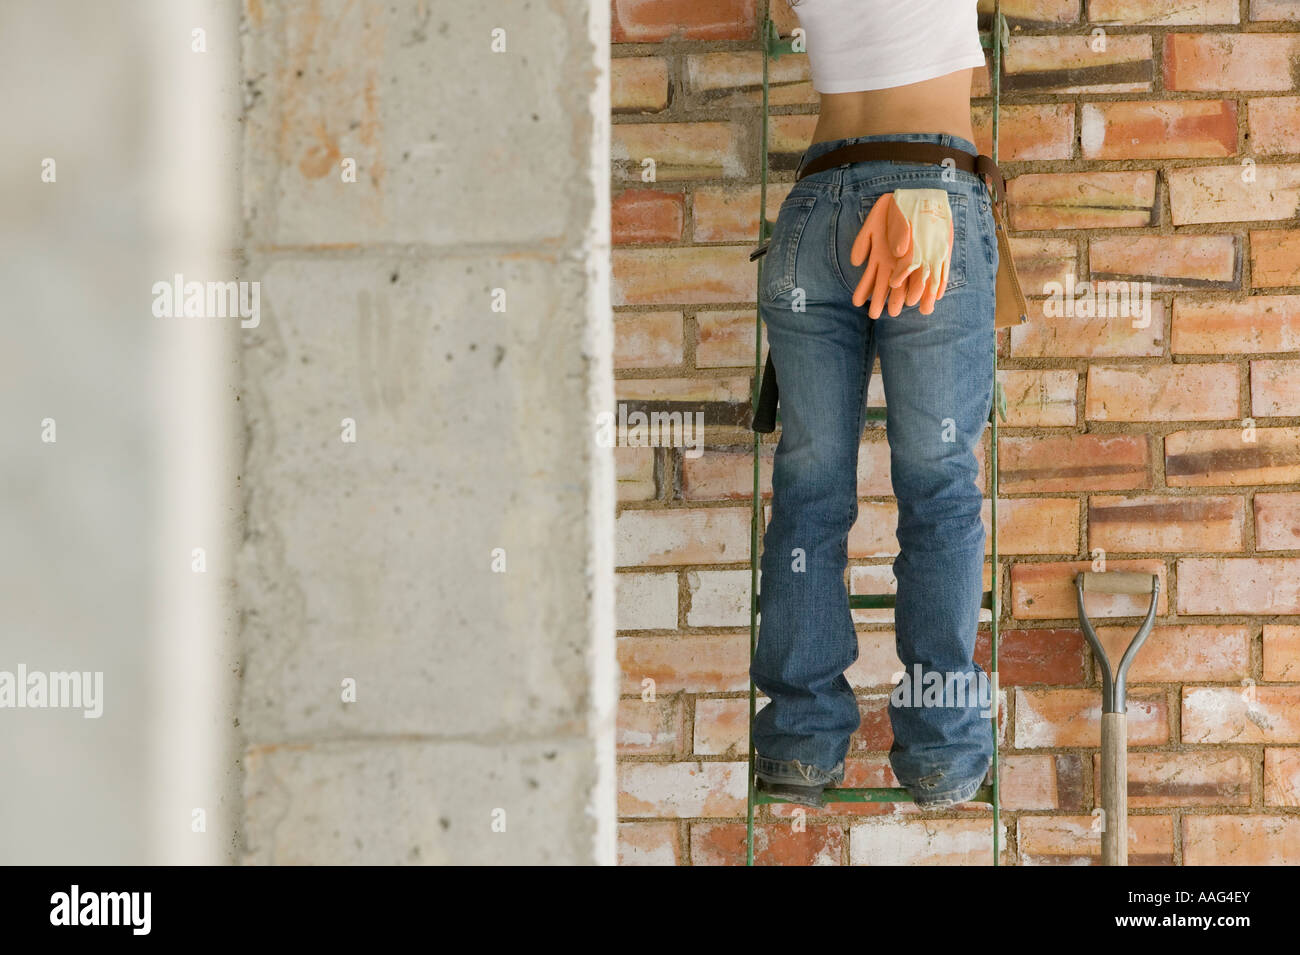 Female construction worker on ladder Stock Photo